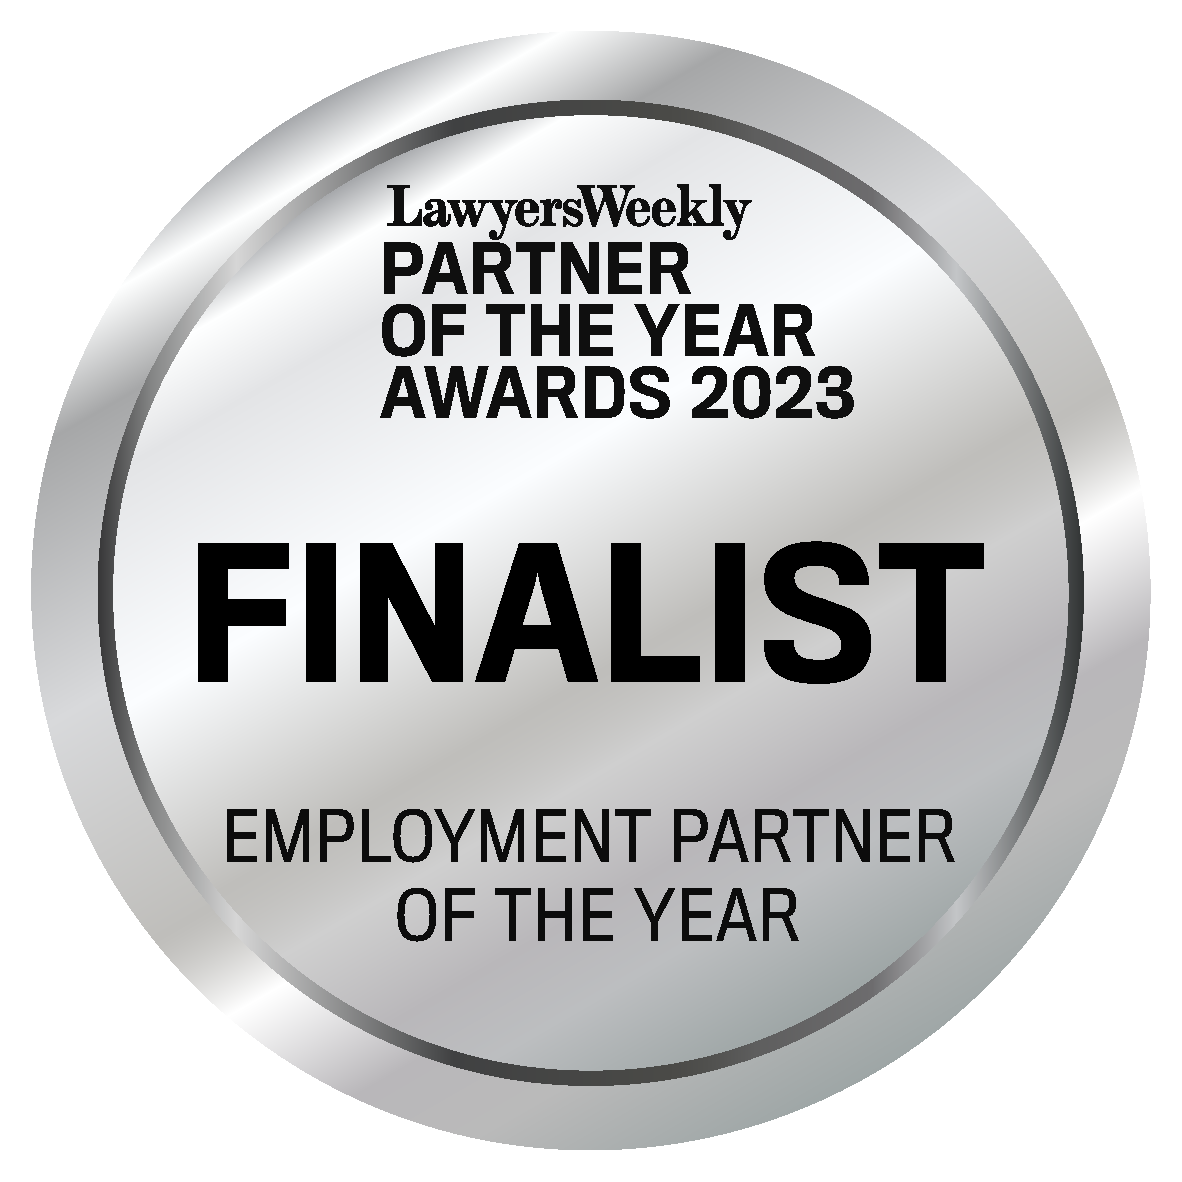 Finalists Employment Partner of the Year